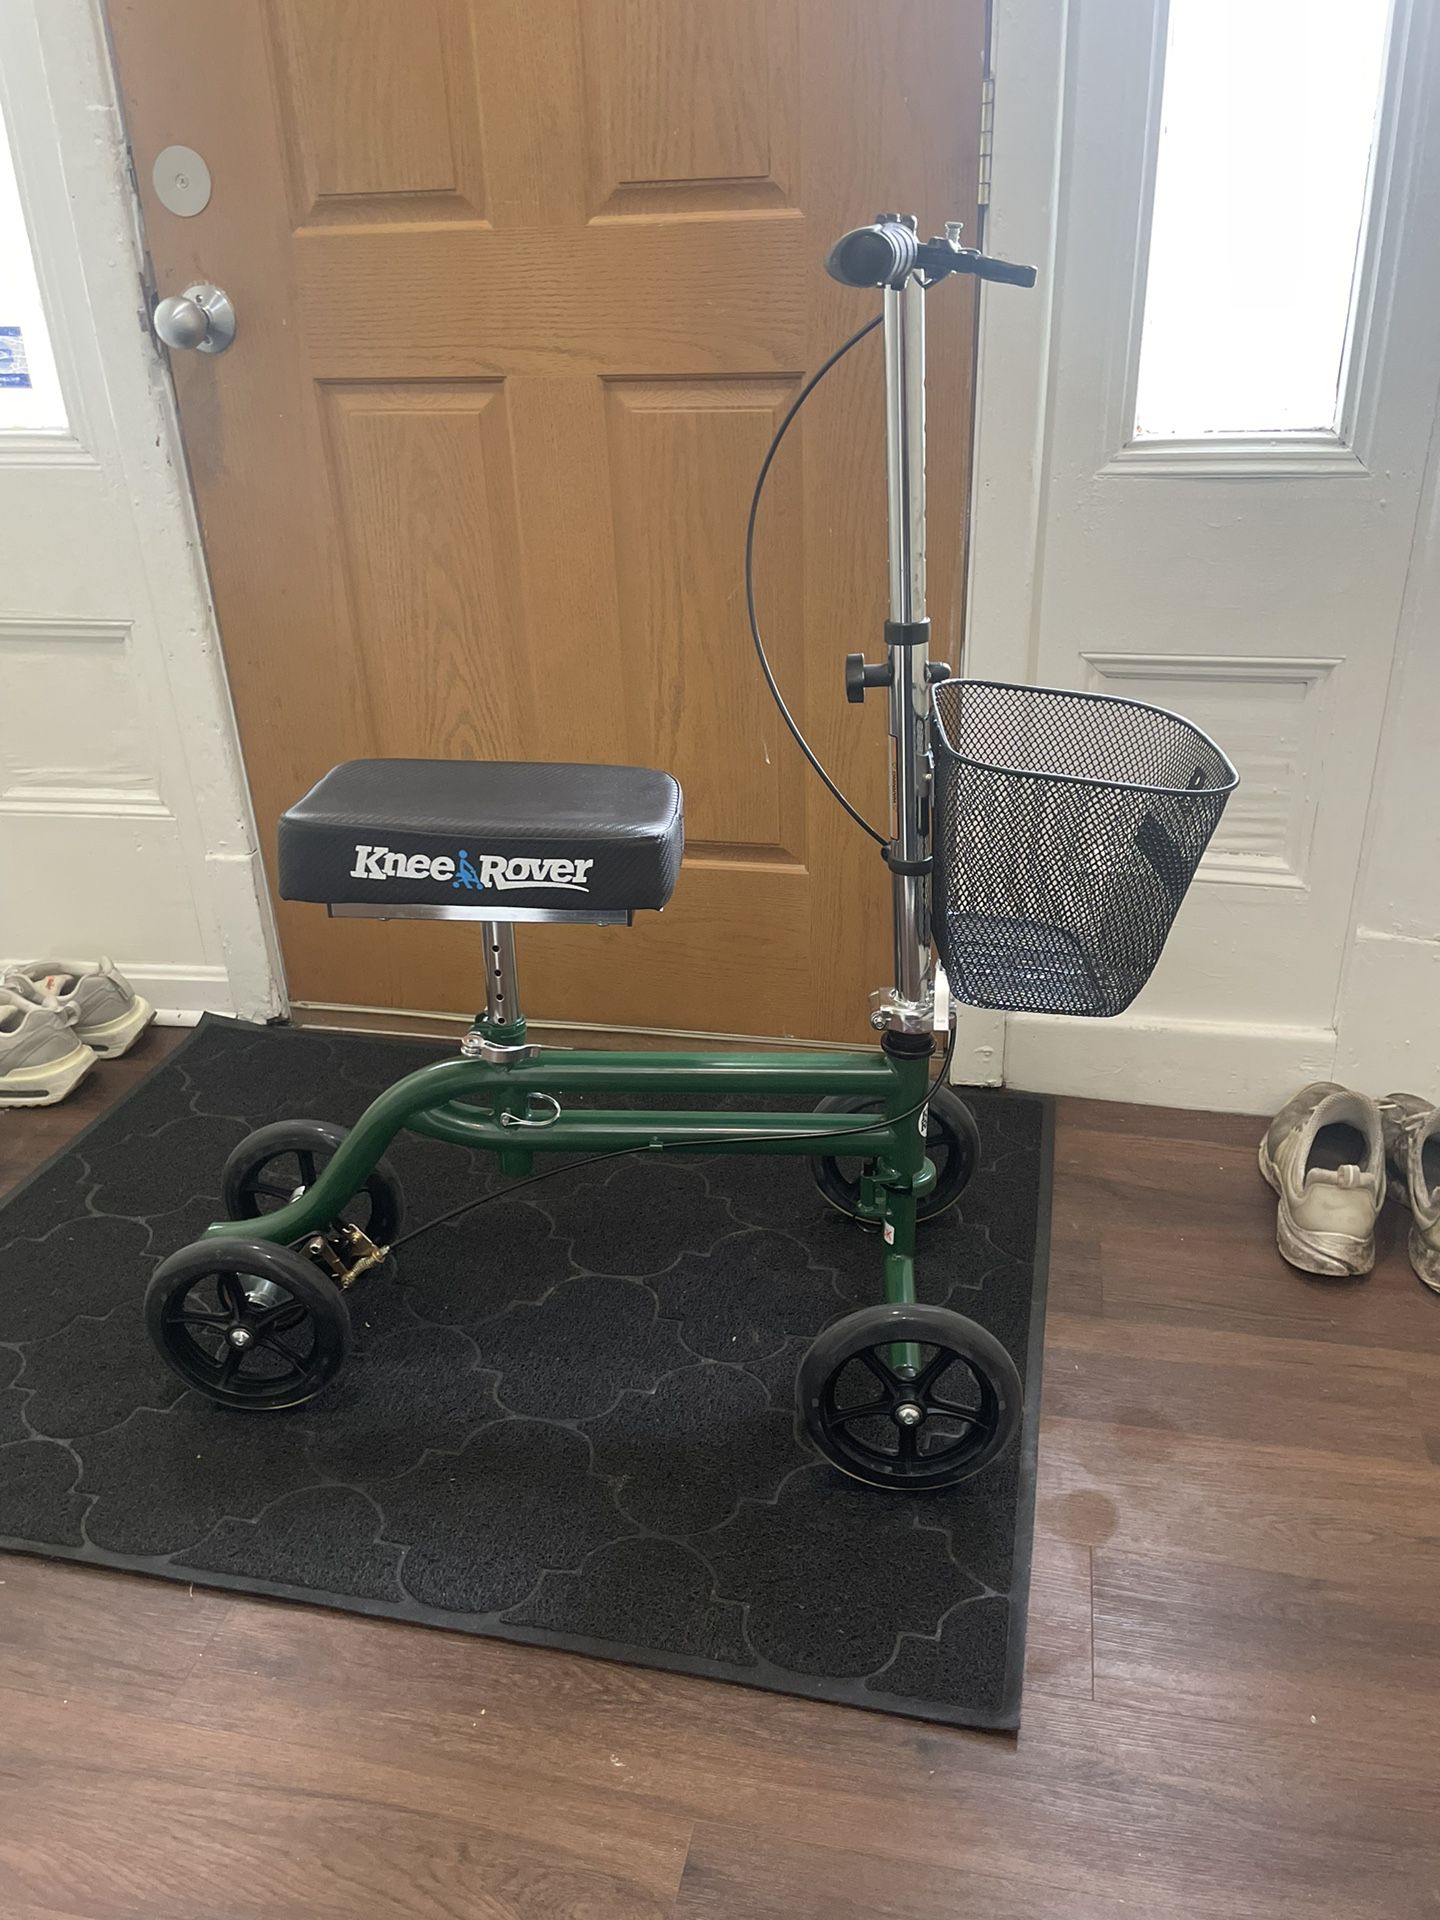 Knee Rover/Knee Scooter